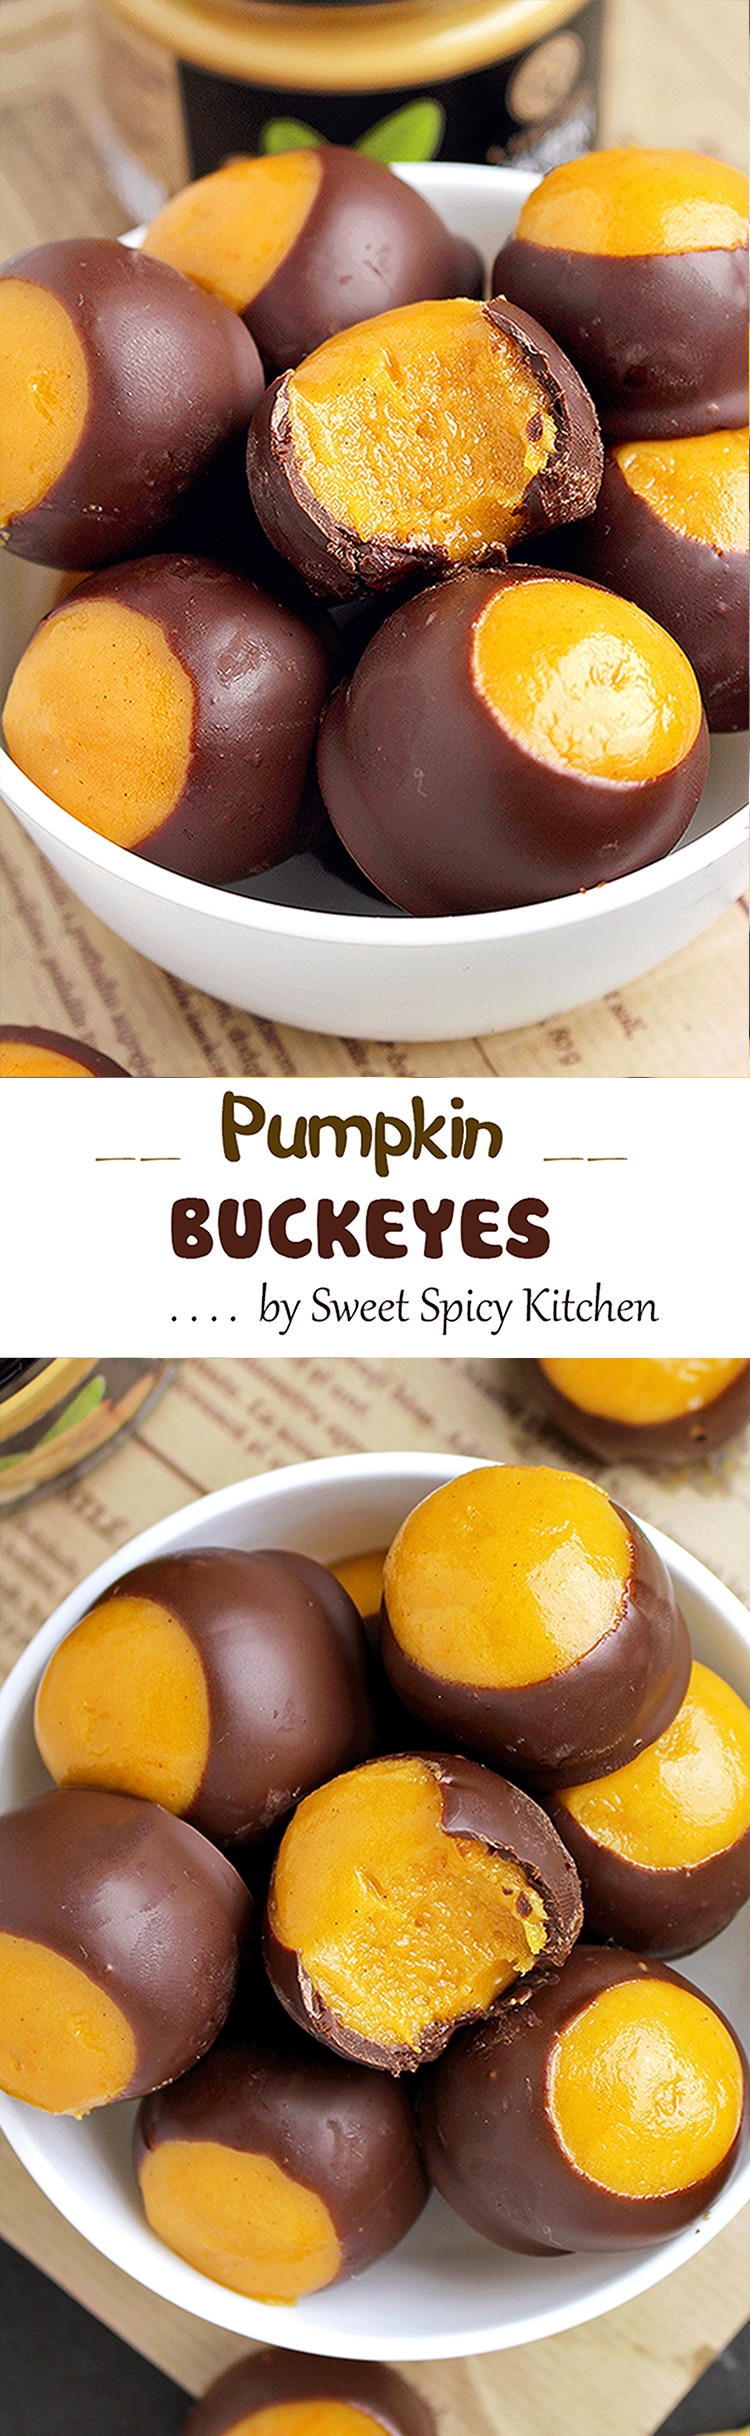 Pumpkin mania goes on, with this Pumpkin Sweet Spicy Buckeyes dessert recipe! You can smell fall in the air along with the smell of fall treats coming from kitchens.